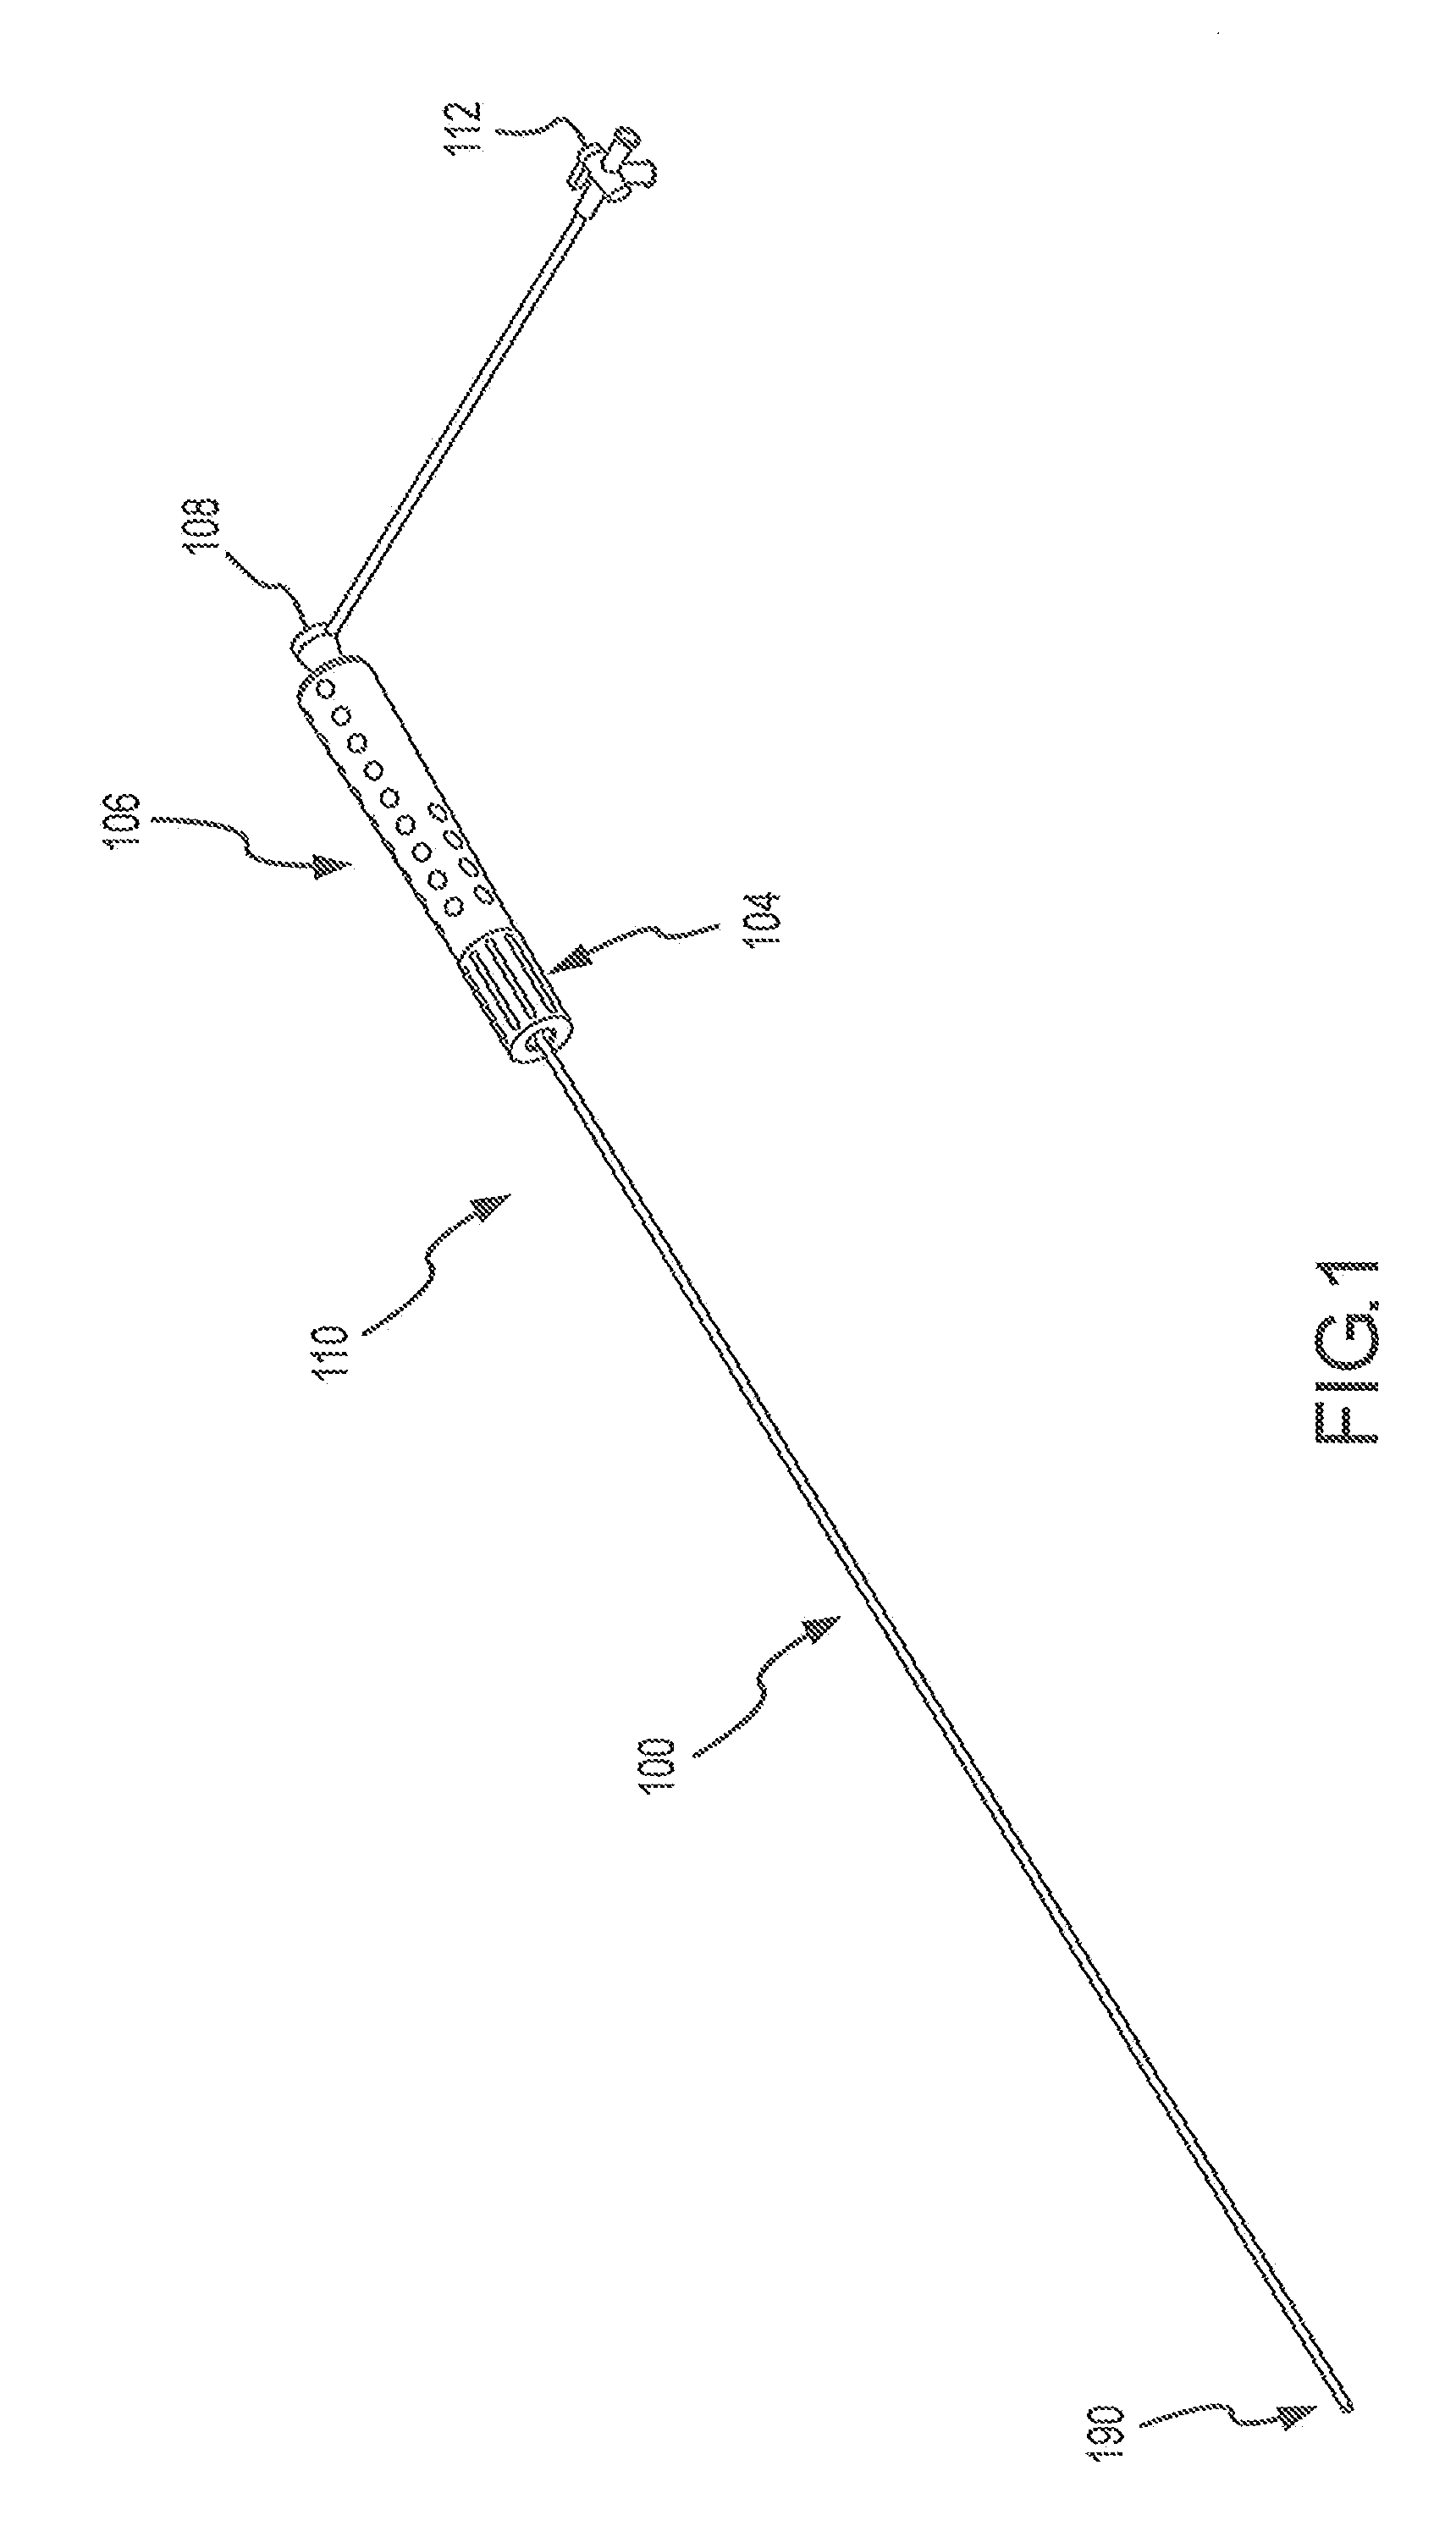 Catheter and introducer catheter having torque transfer layer and method of manufacture